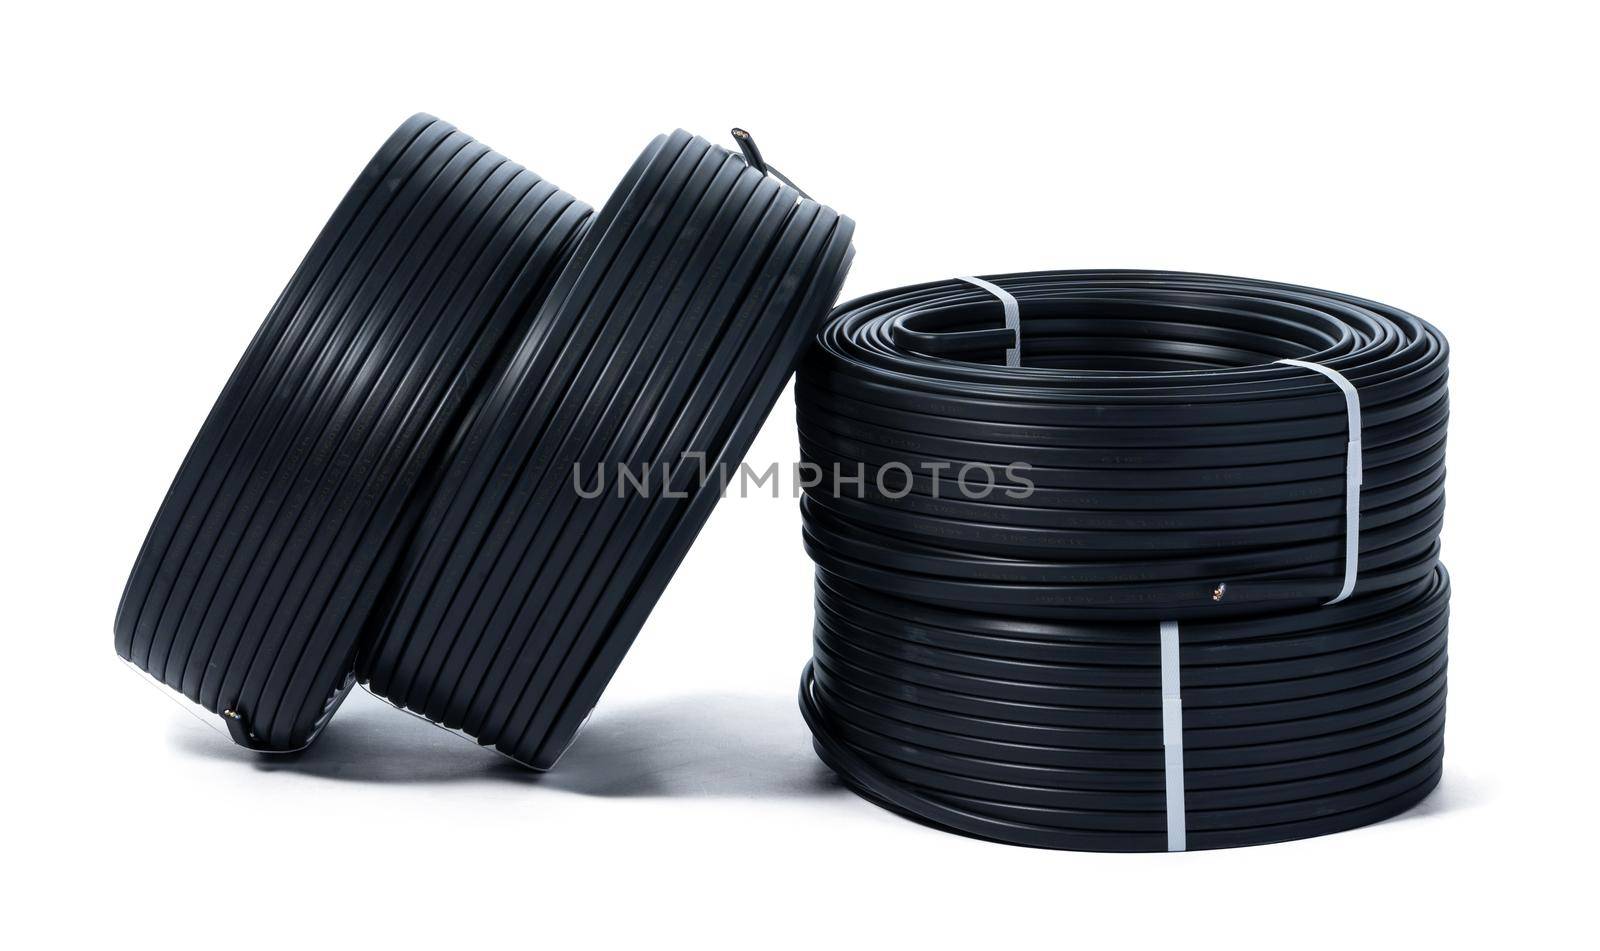 Coils of black cable isolated on white background by Fabrikasimf